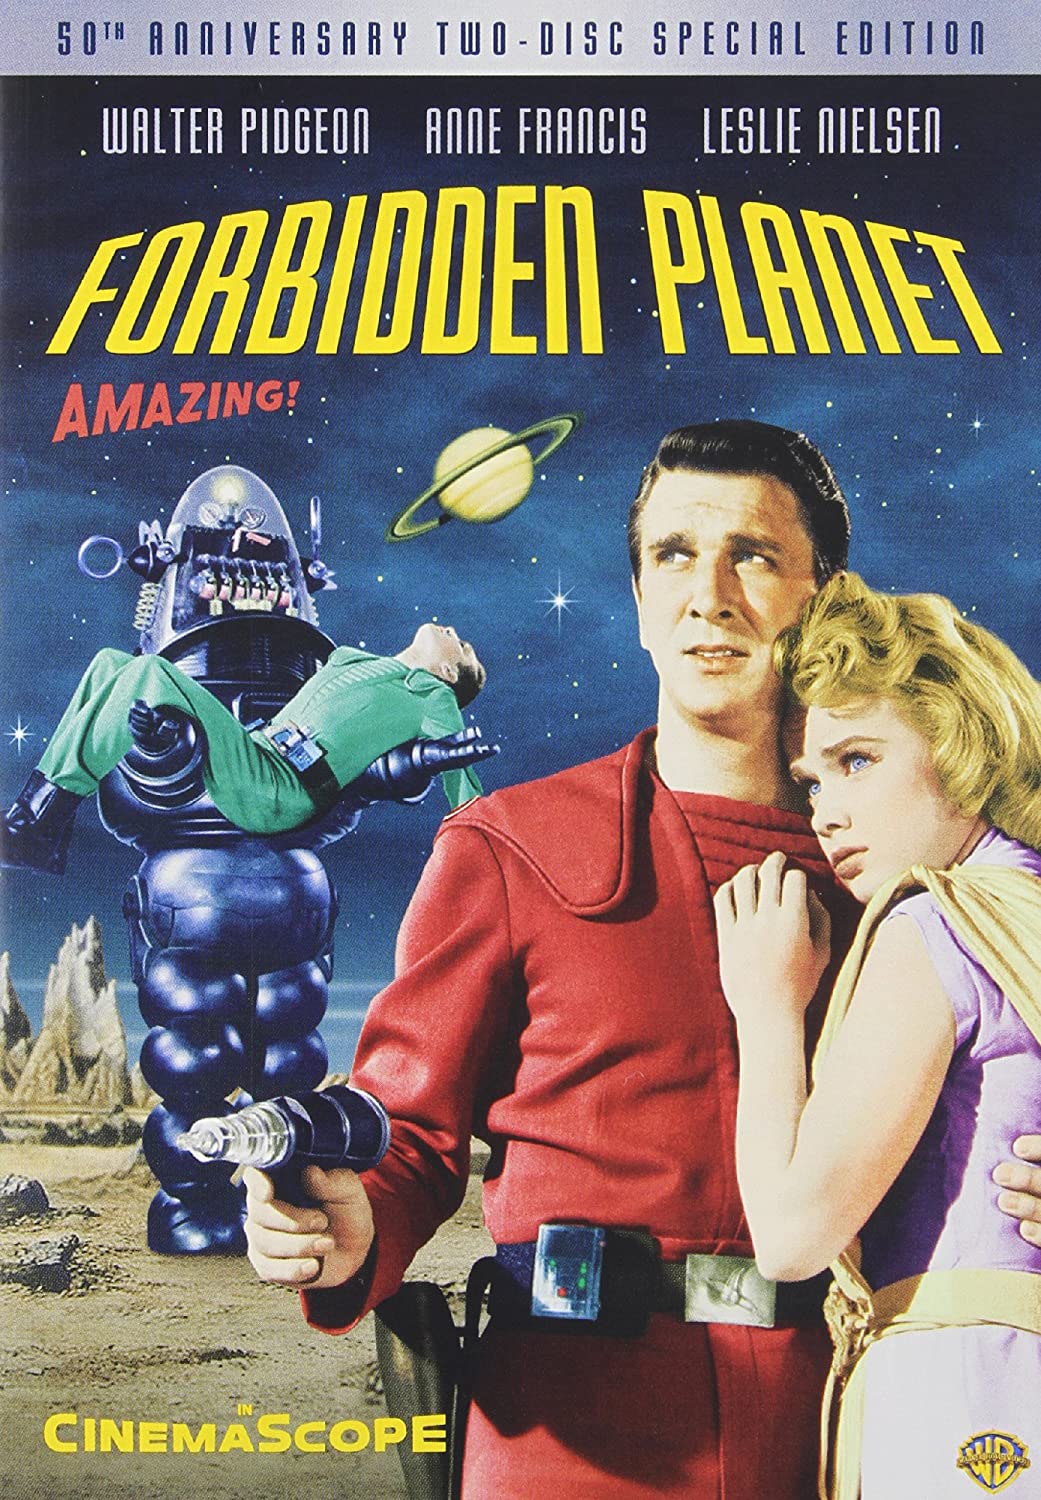 Forbidden Planet directed by Fred Wilcox